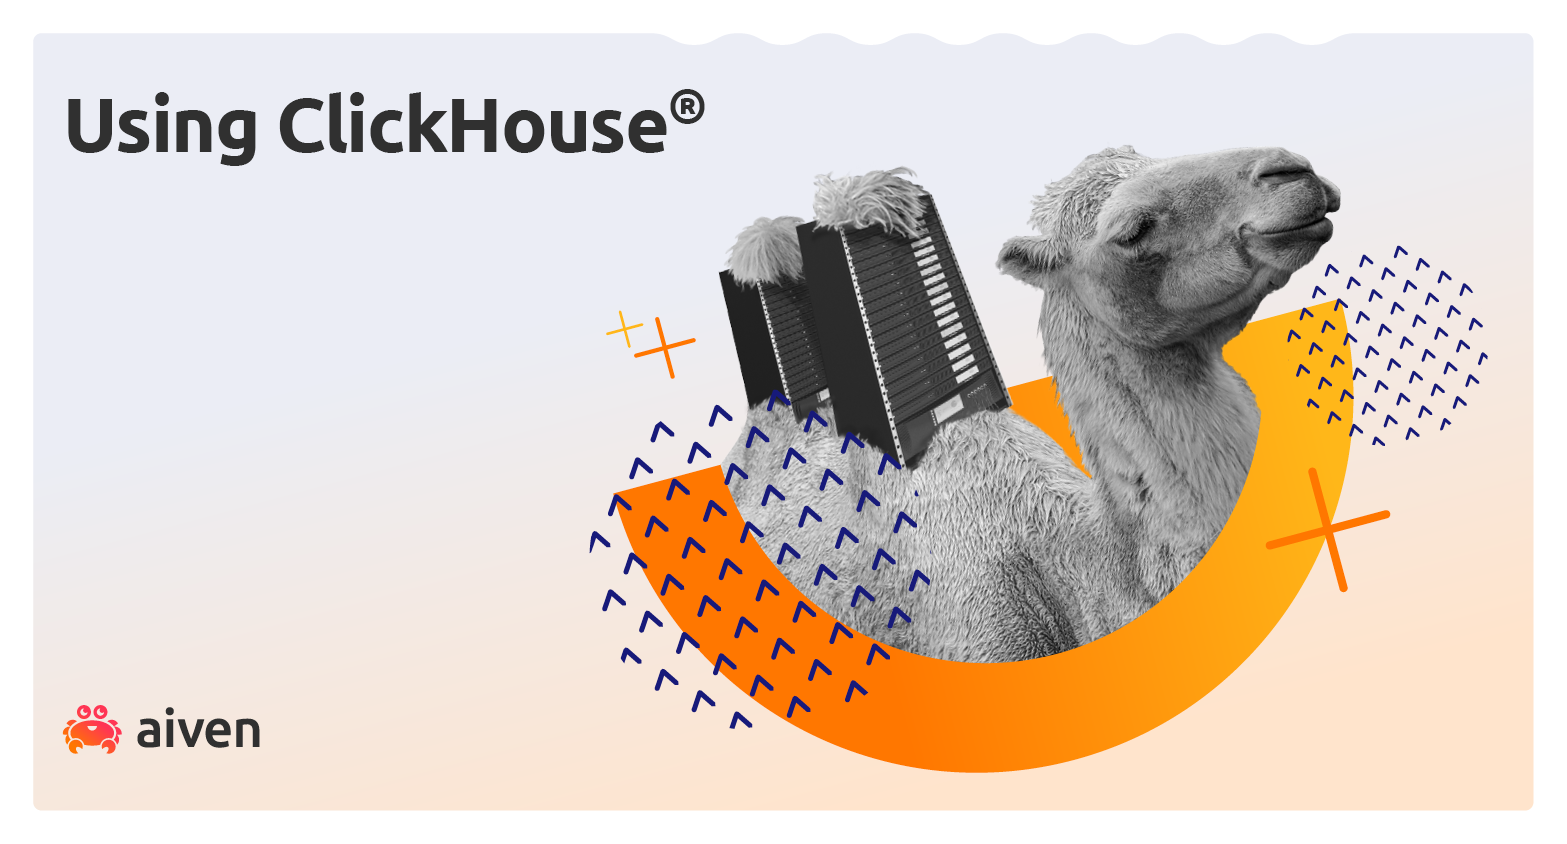 Use cases for ClickHouse® illustration